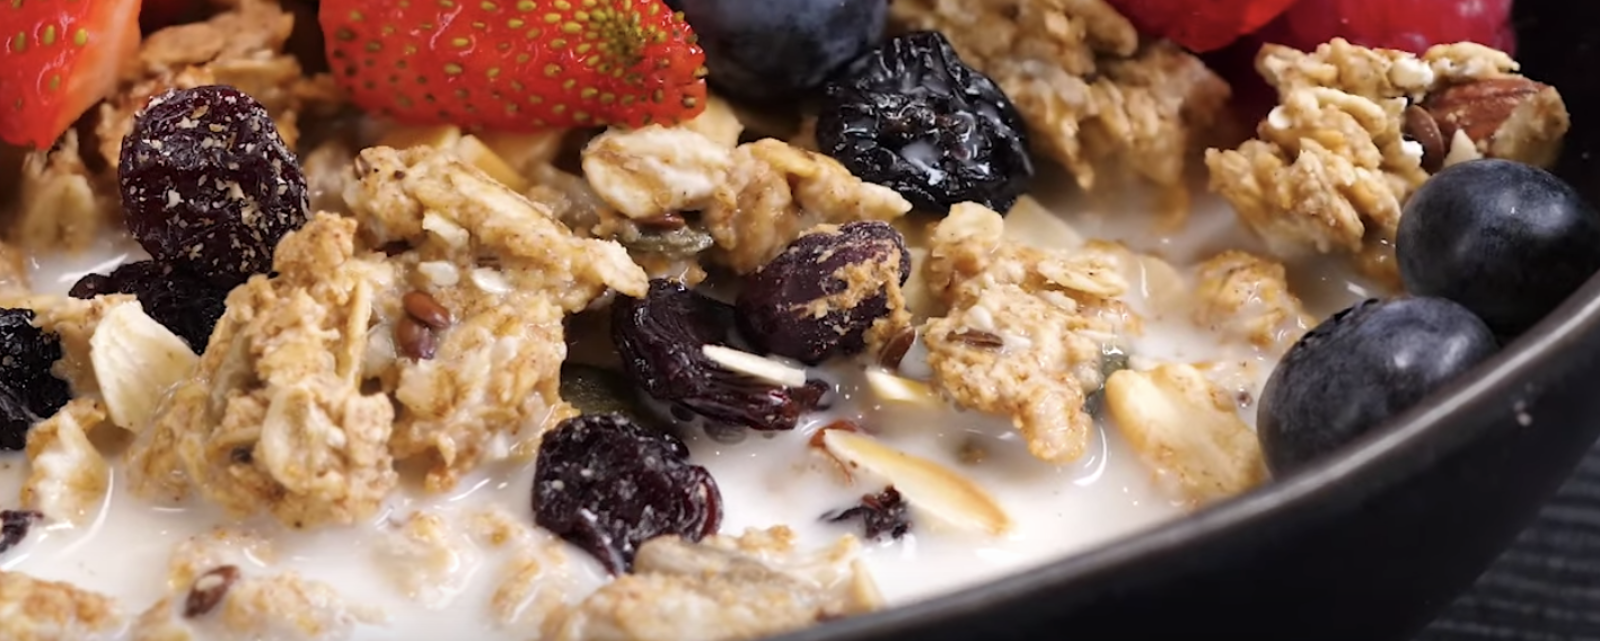 maple granola accompanied by 1 cup of unsweetened almond milk